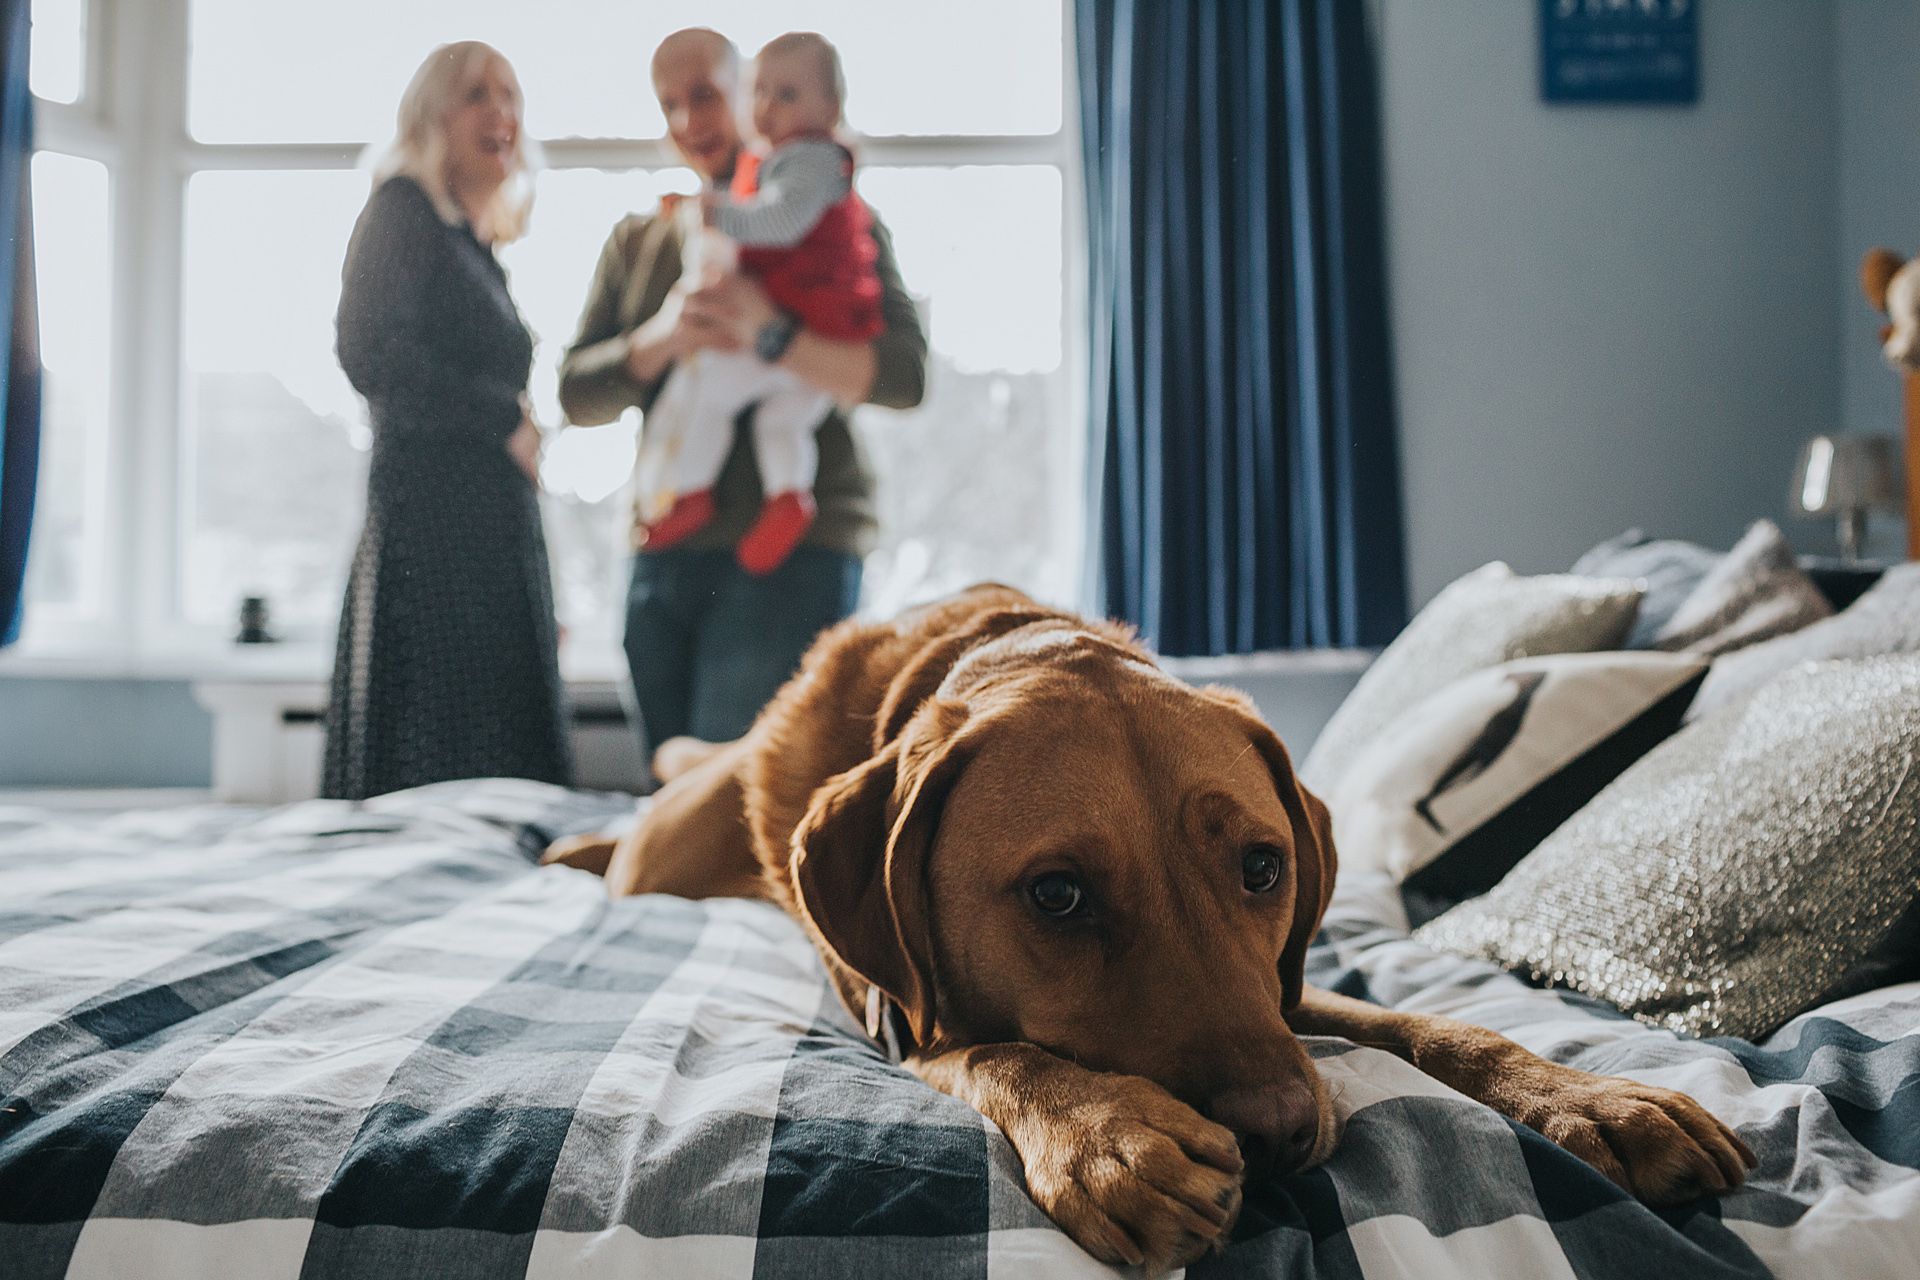 The family dog has a little rest of the bed, playing up to the camera during documentary family photo shoot, Liverpool. Family are pictured laughing behind the dog.  